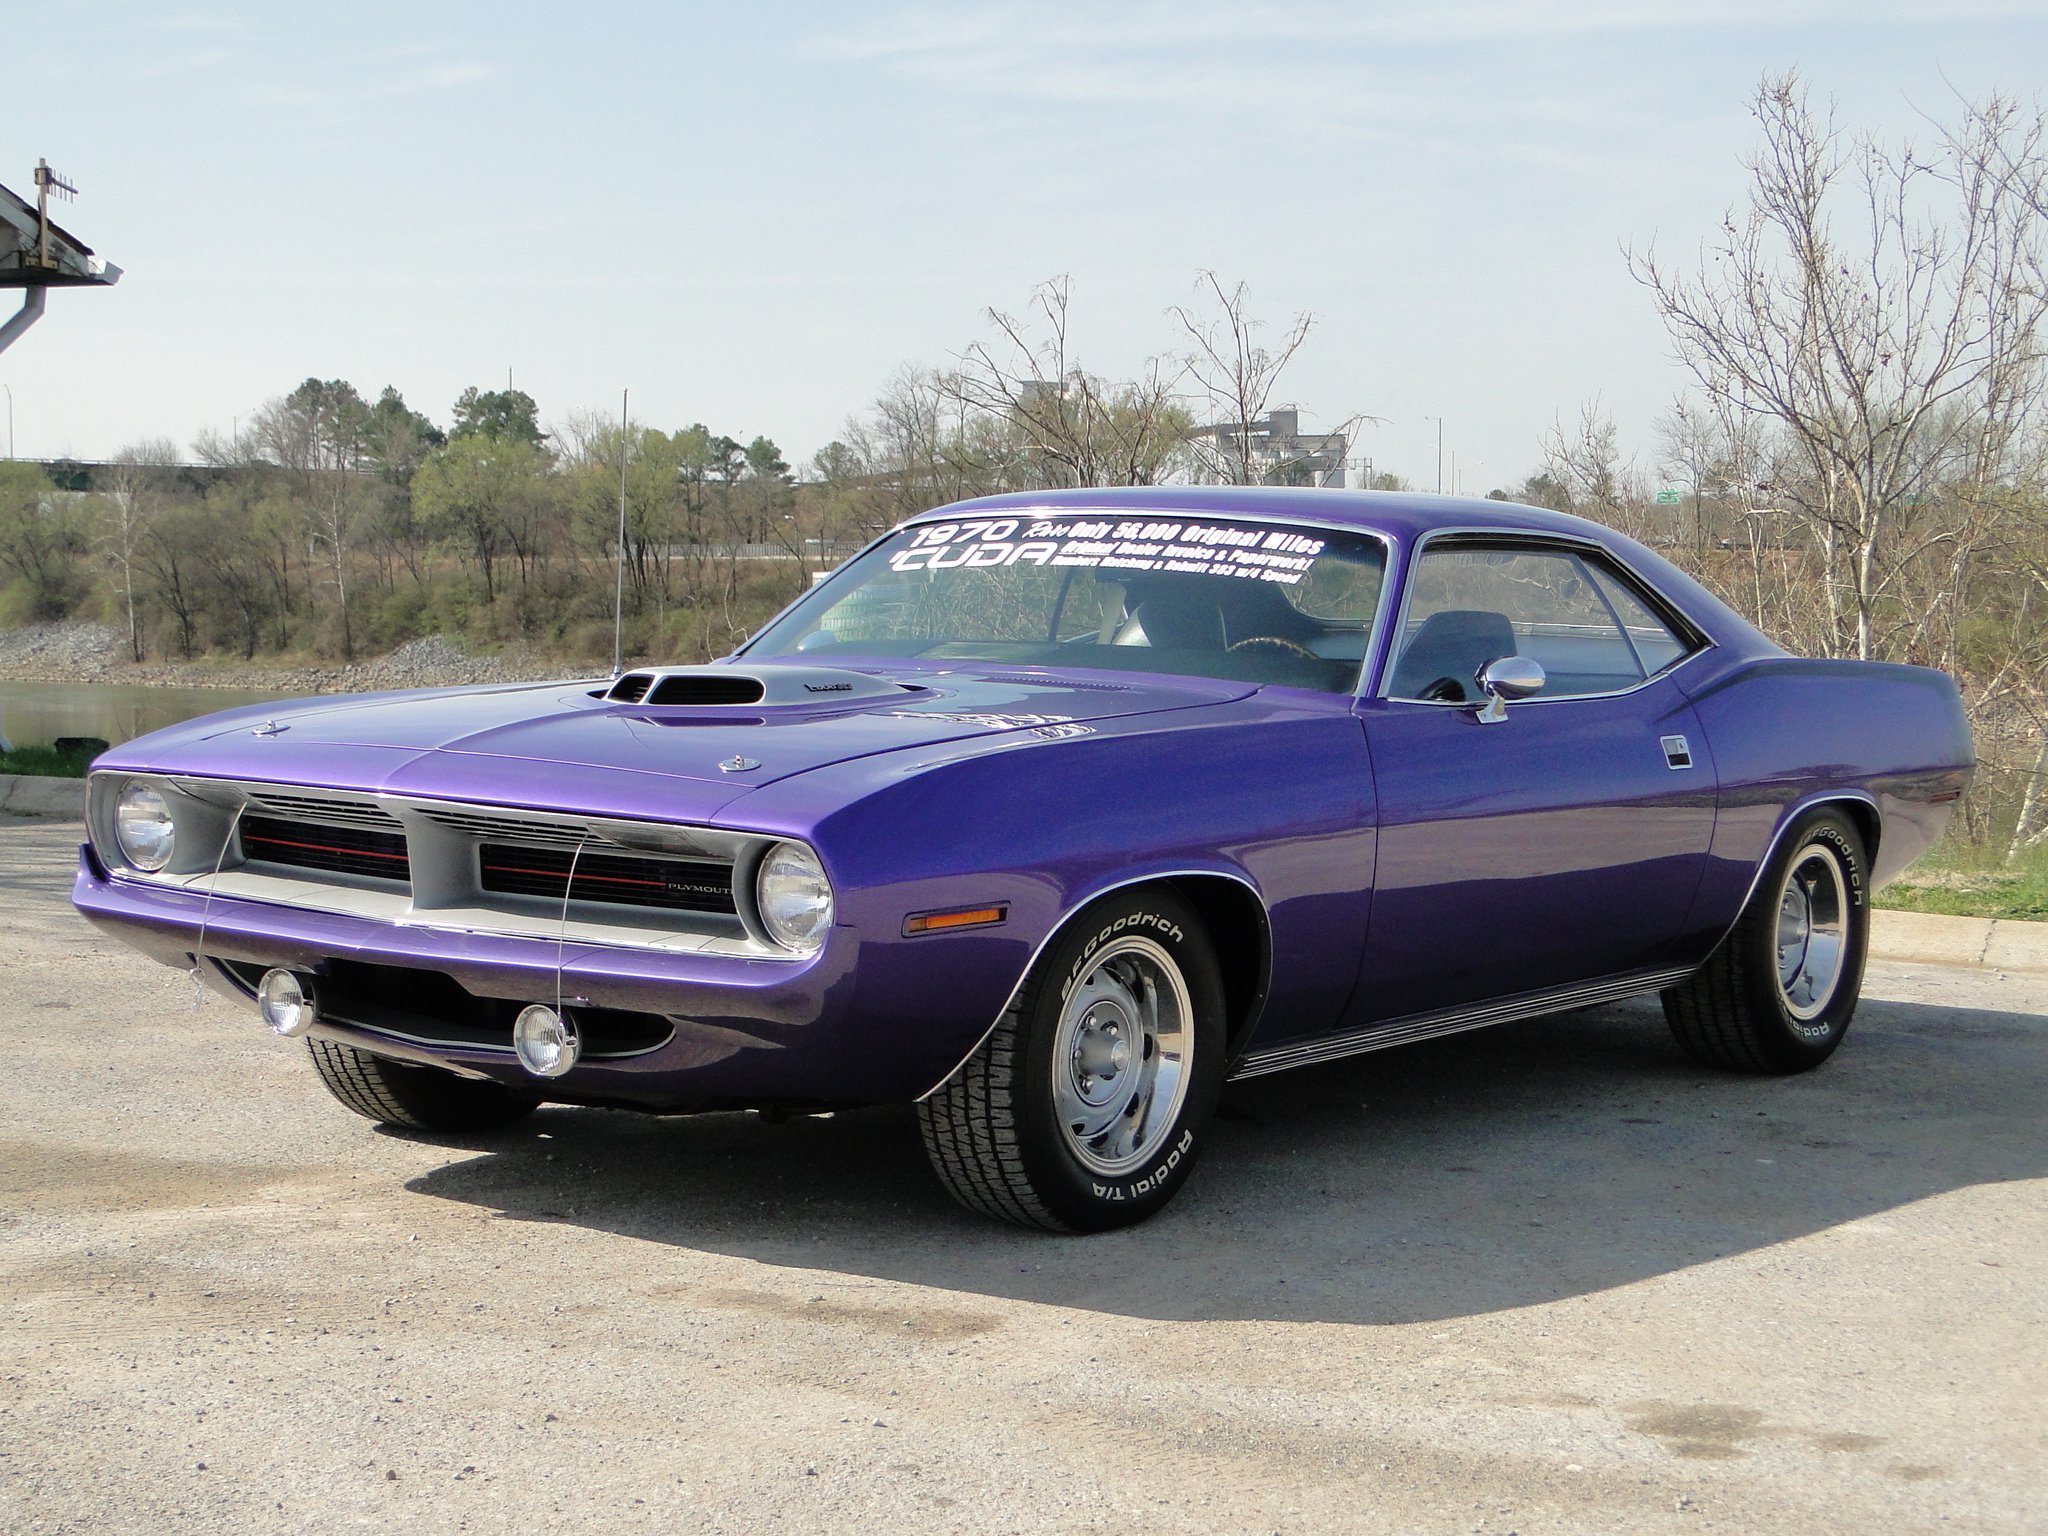 Download Latest HD Wallpaper of, Vehicles, 1970 Plymouth Barracuda